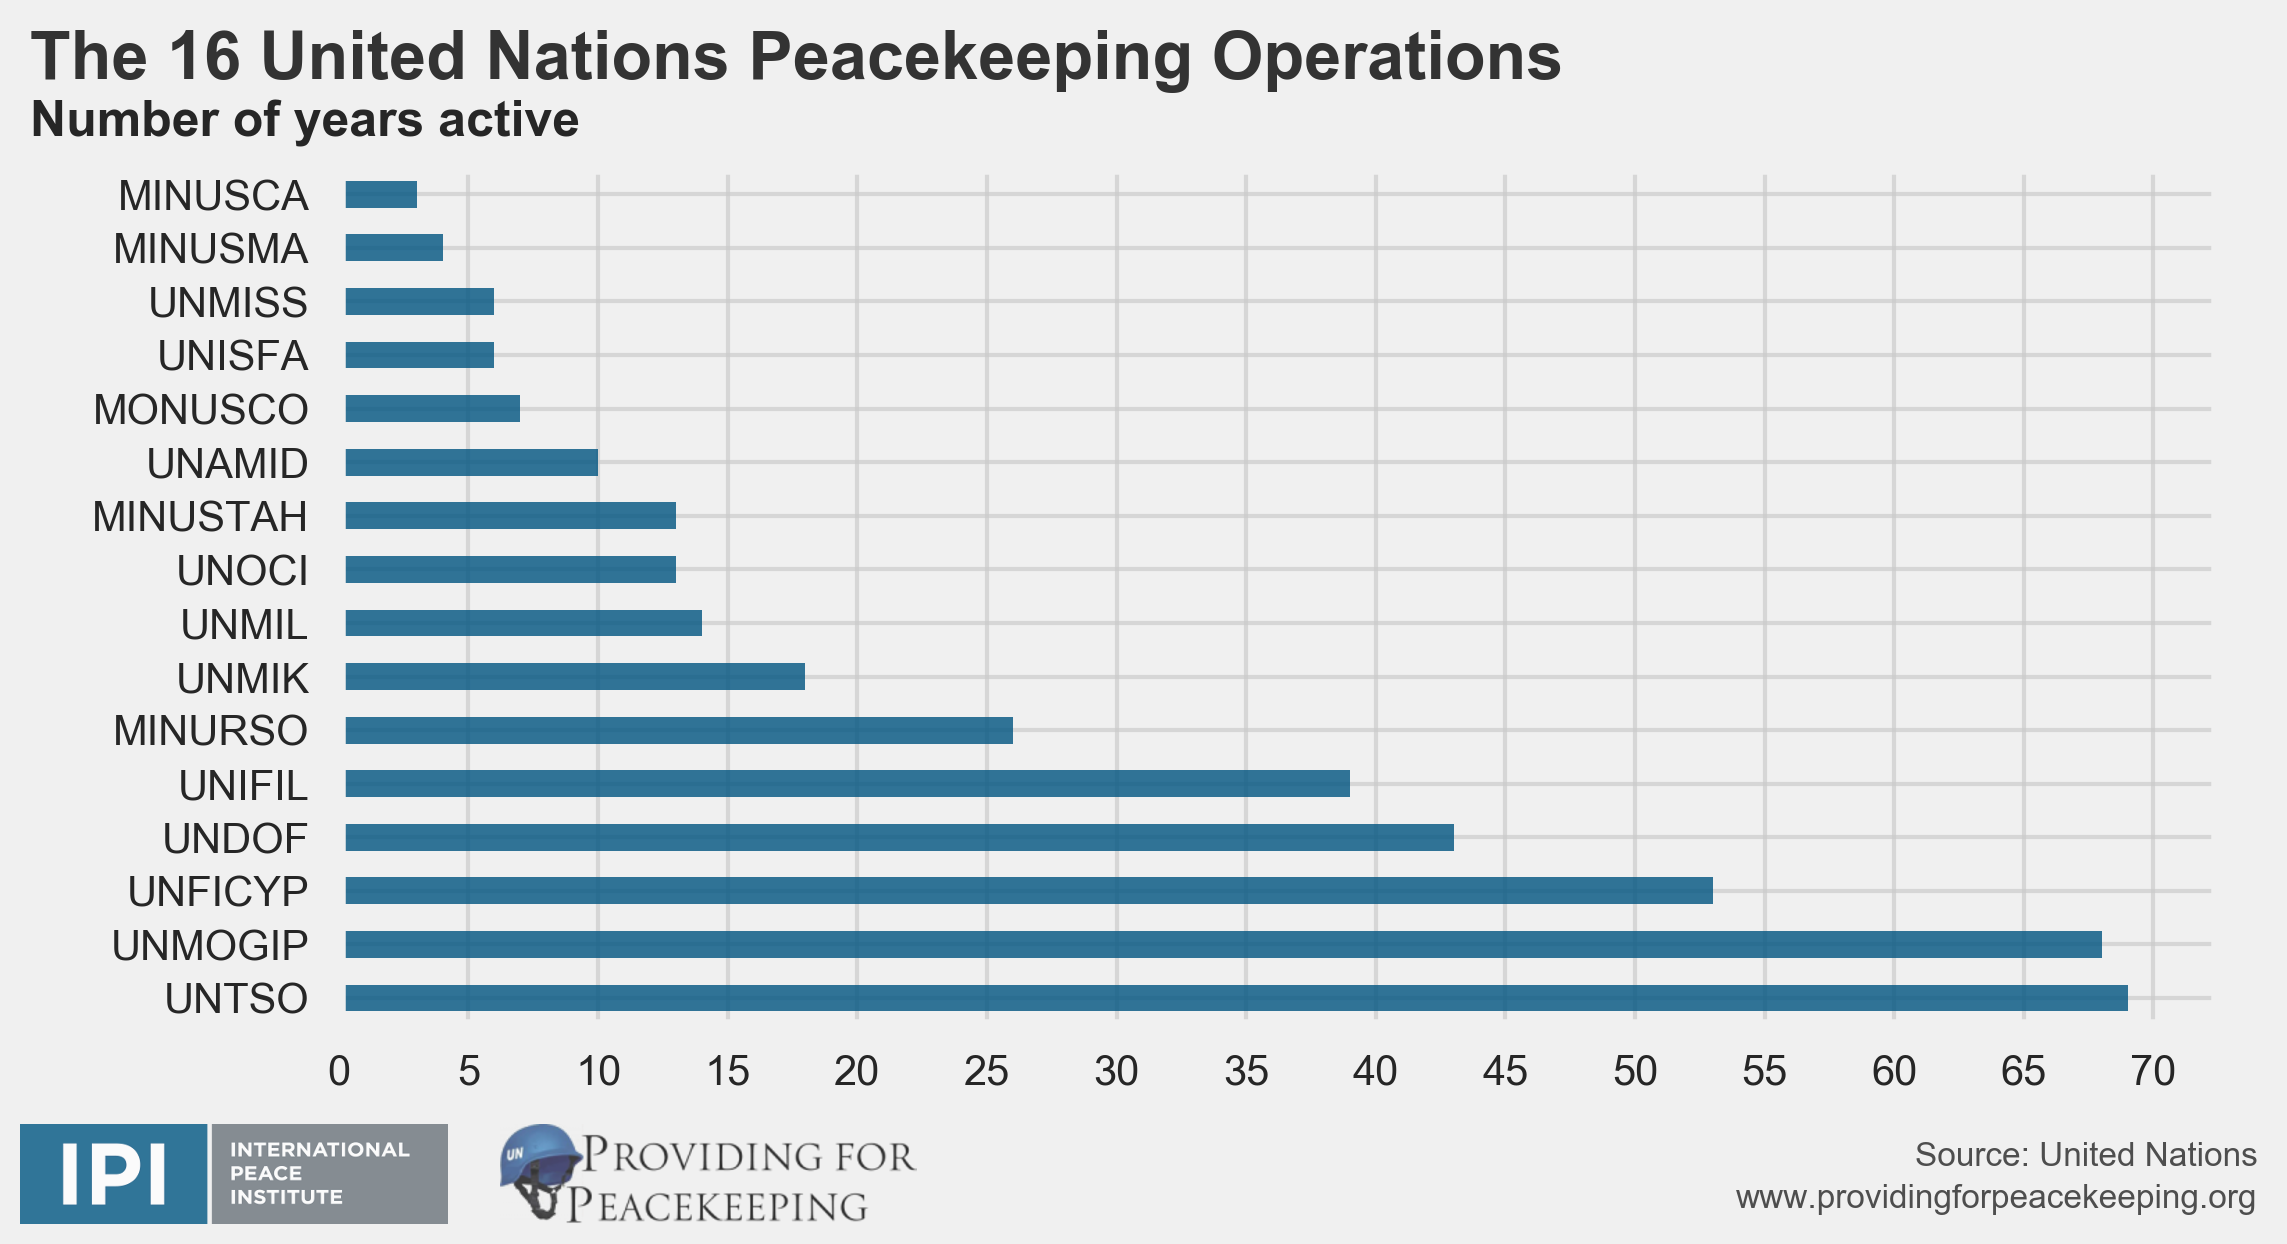 https://www.ipinst.org/wp-content/uploads/2020/05/2-Graph-1-The-16-United-Nations-Peacekeeping-Operations-_barh_web.png